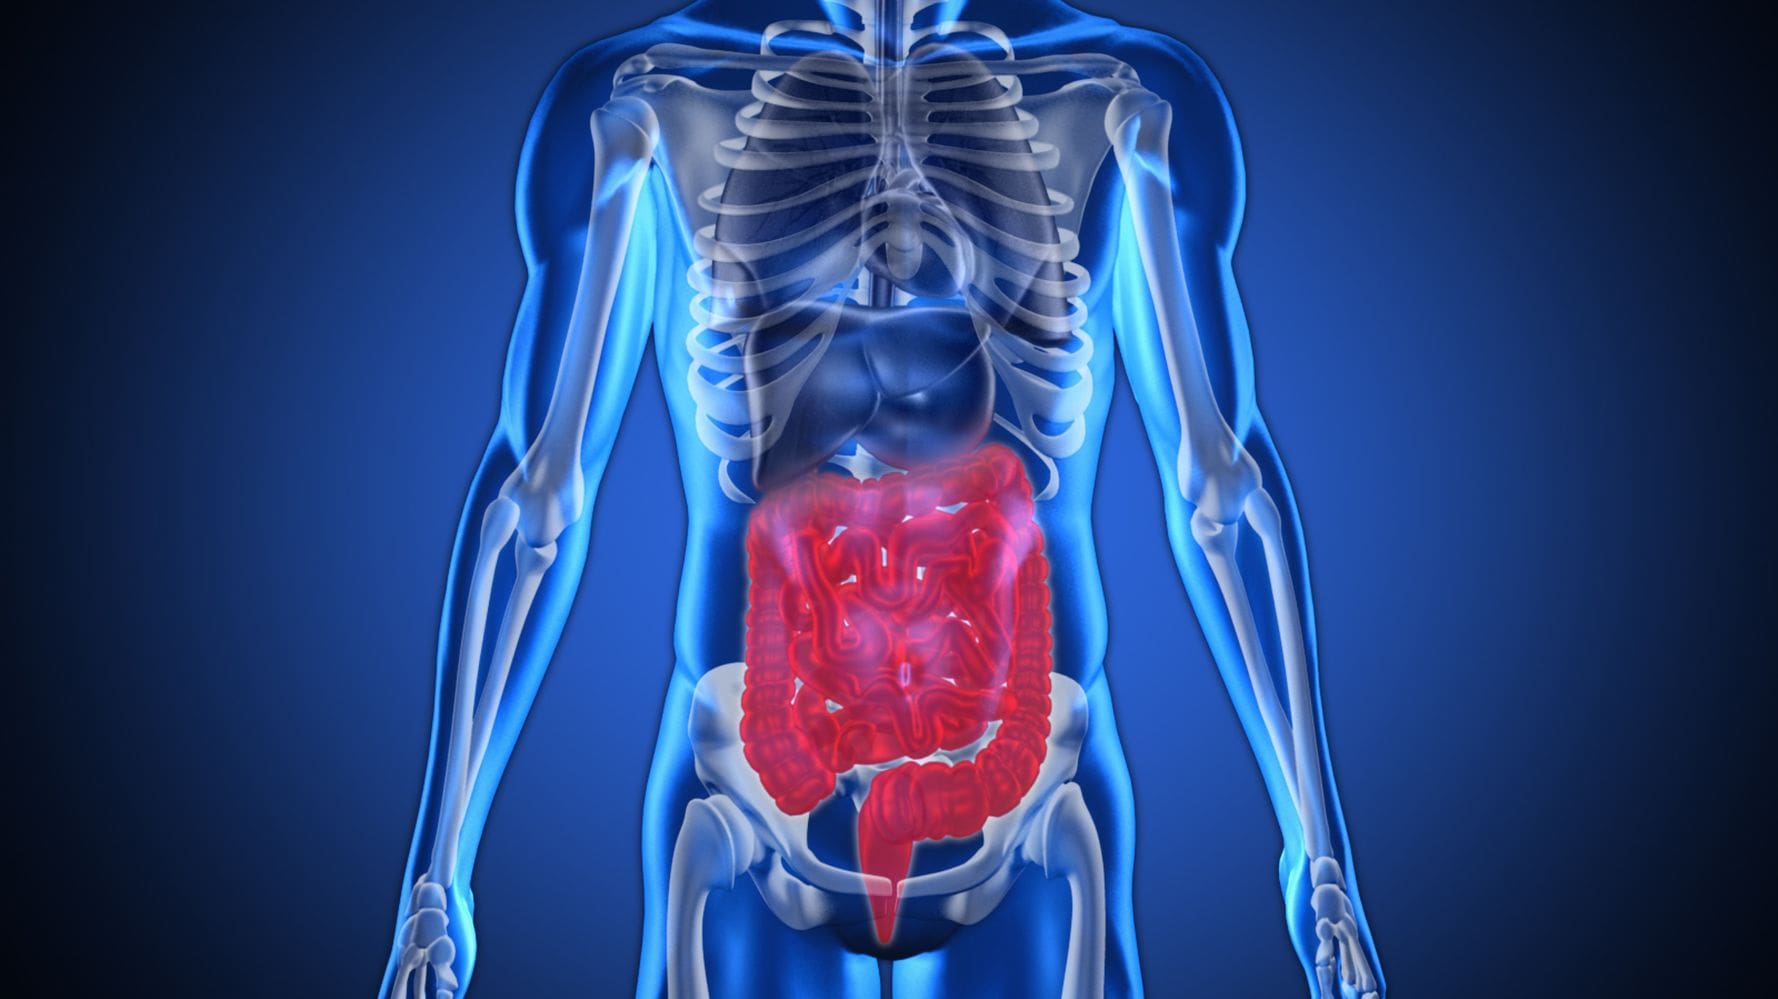 Colon Cleansing: The Health Benefits and Risks